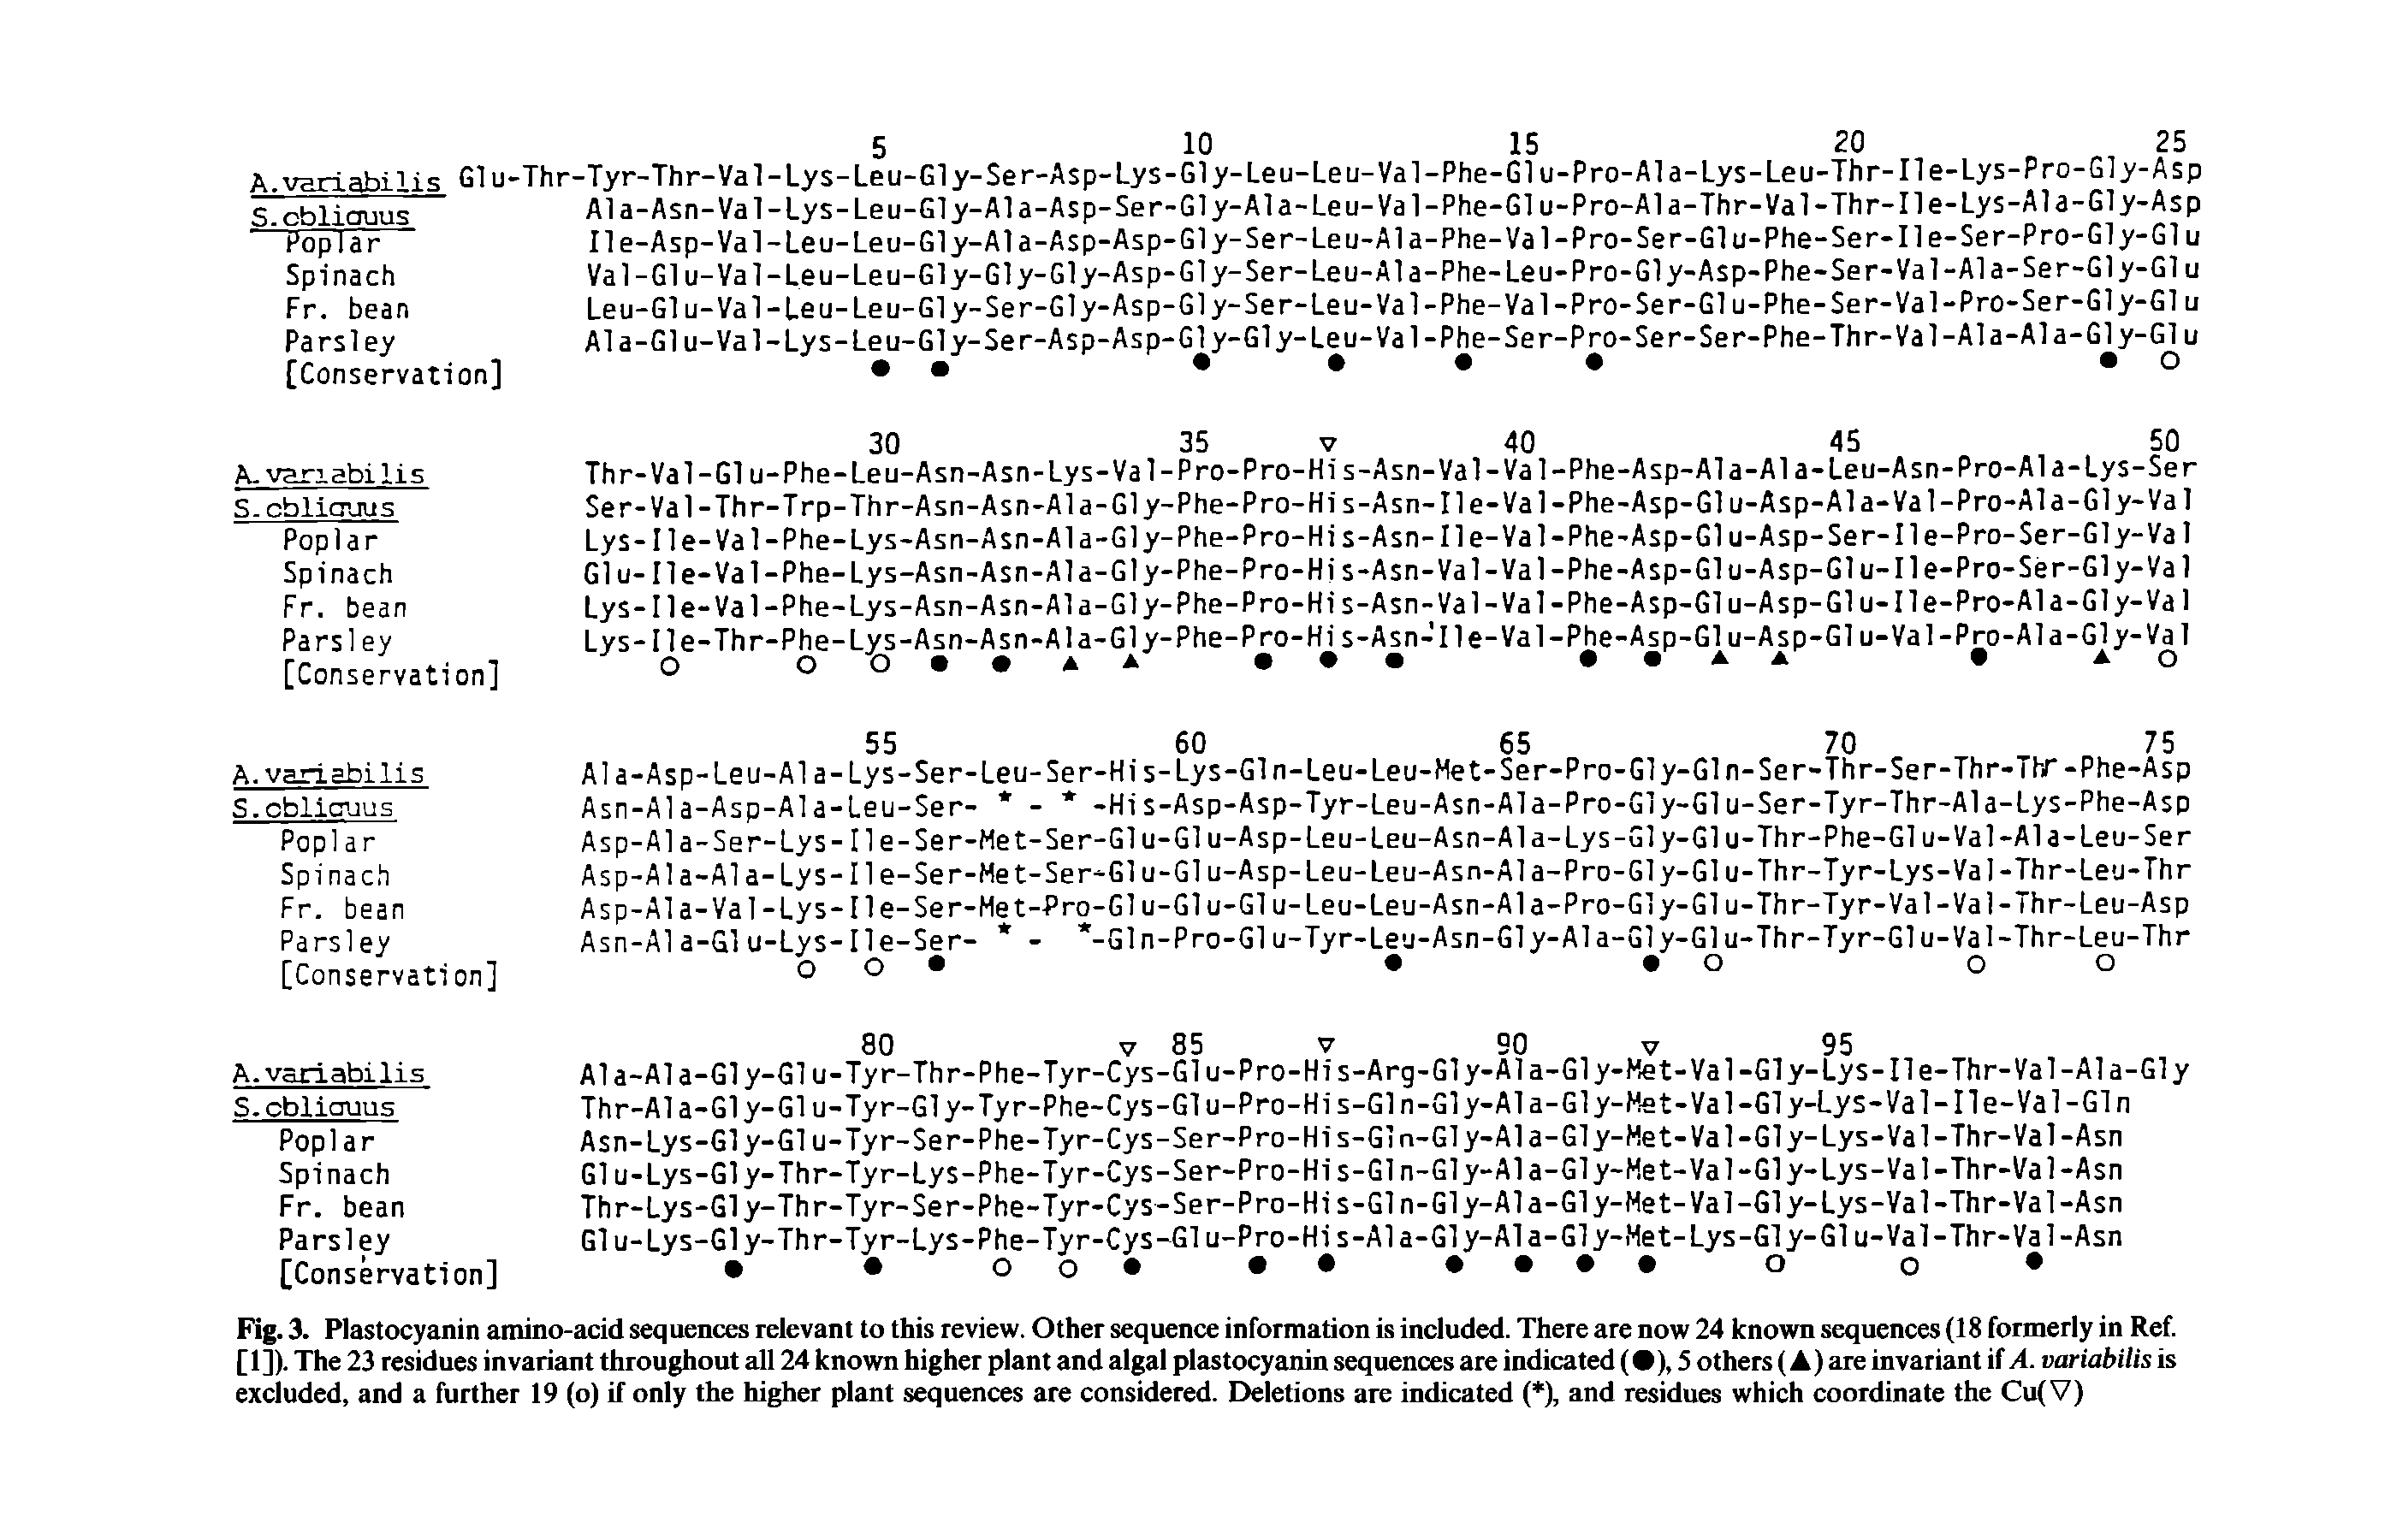 Fig. 3. Plastocyanin amino-acid sequences relevant to this review. Other sequence information is included. There are now 24 known sequences (18 formerly in Ref. [ I]). The 23 residues invariant throughout all 24 known higher plant and algal plastocyanin sequences are indicated ( ), 5 others (A) are invariant if A. variabilis is excluded, and a further 19 (o) if only the higher plant sequences are considered. Eieletions are indicated ( ), and residues which coordinate the Cu(V)...